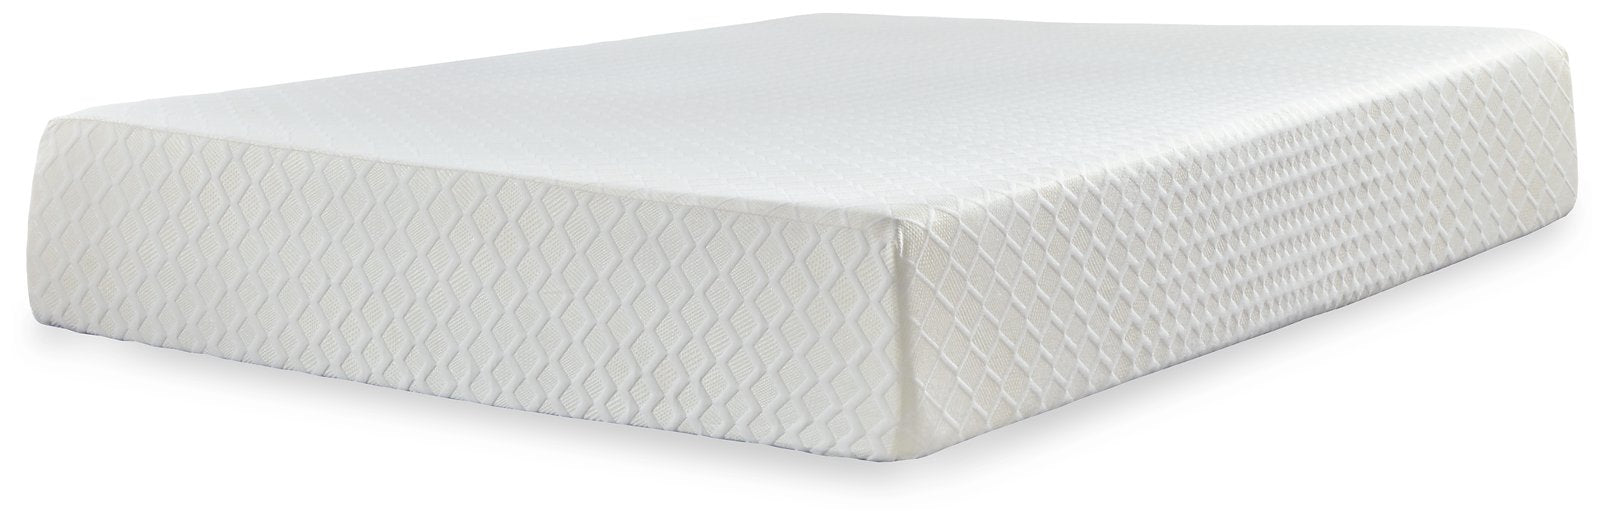 Chime 12 Inch Memory Foam Mattress Set - Home And Beyond